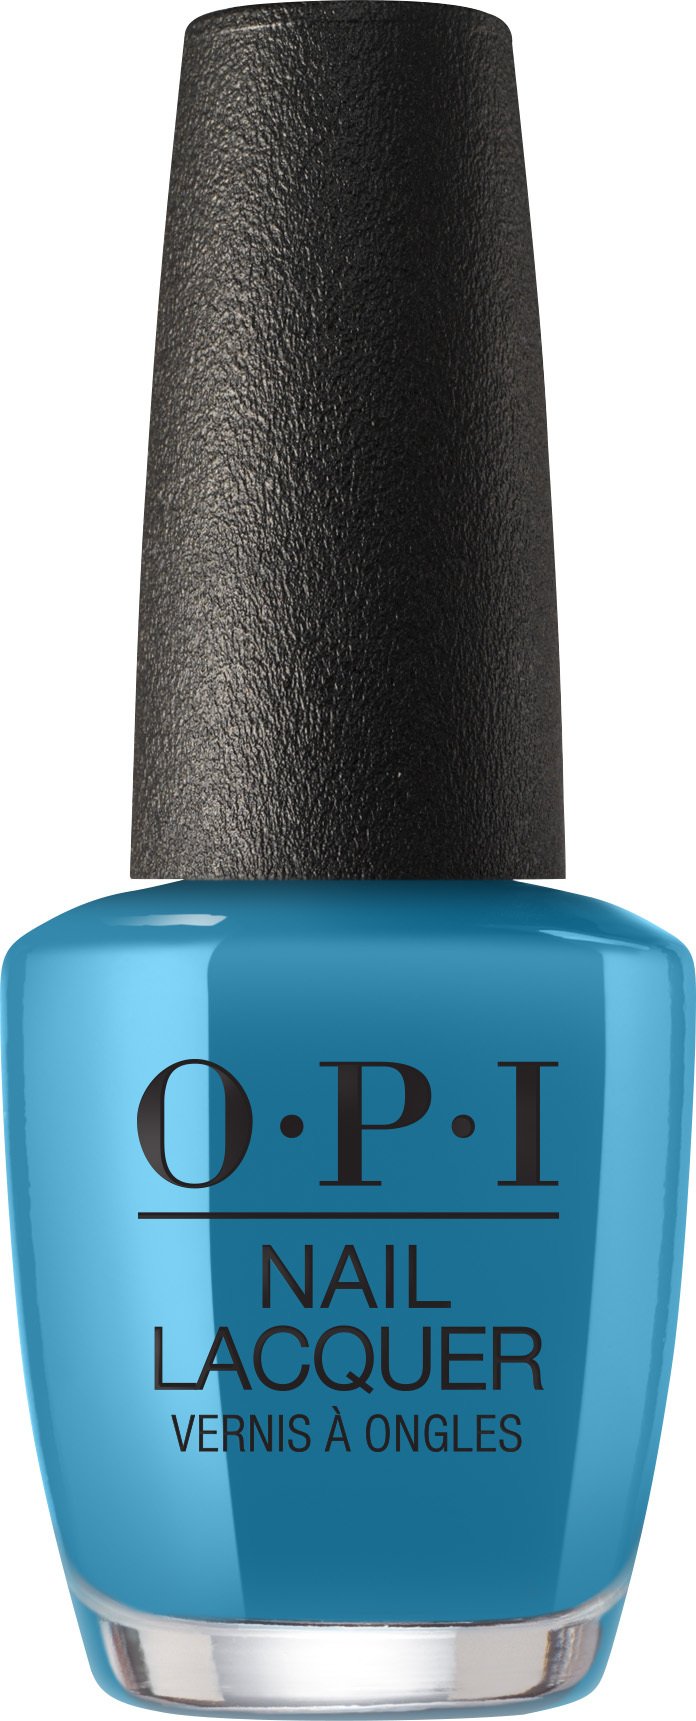 OPI Nail Lacquer - OPI Grabs the Unicorn by the Horn